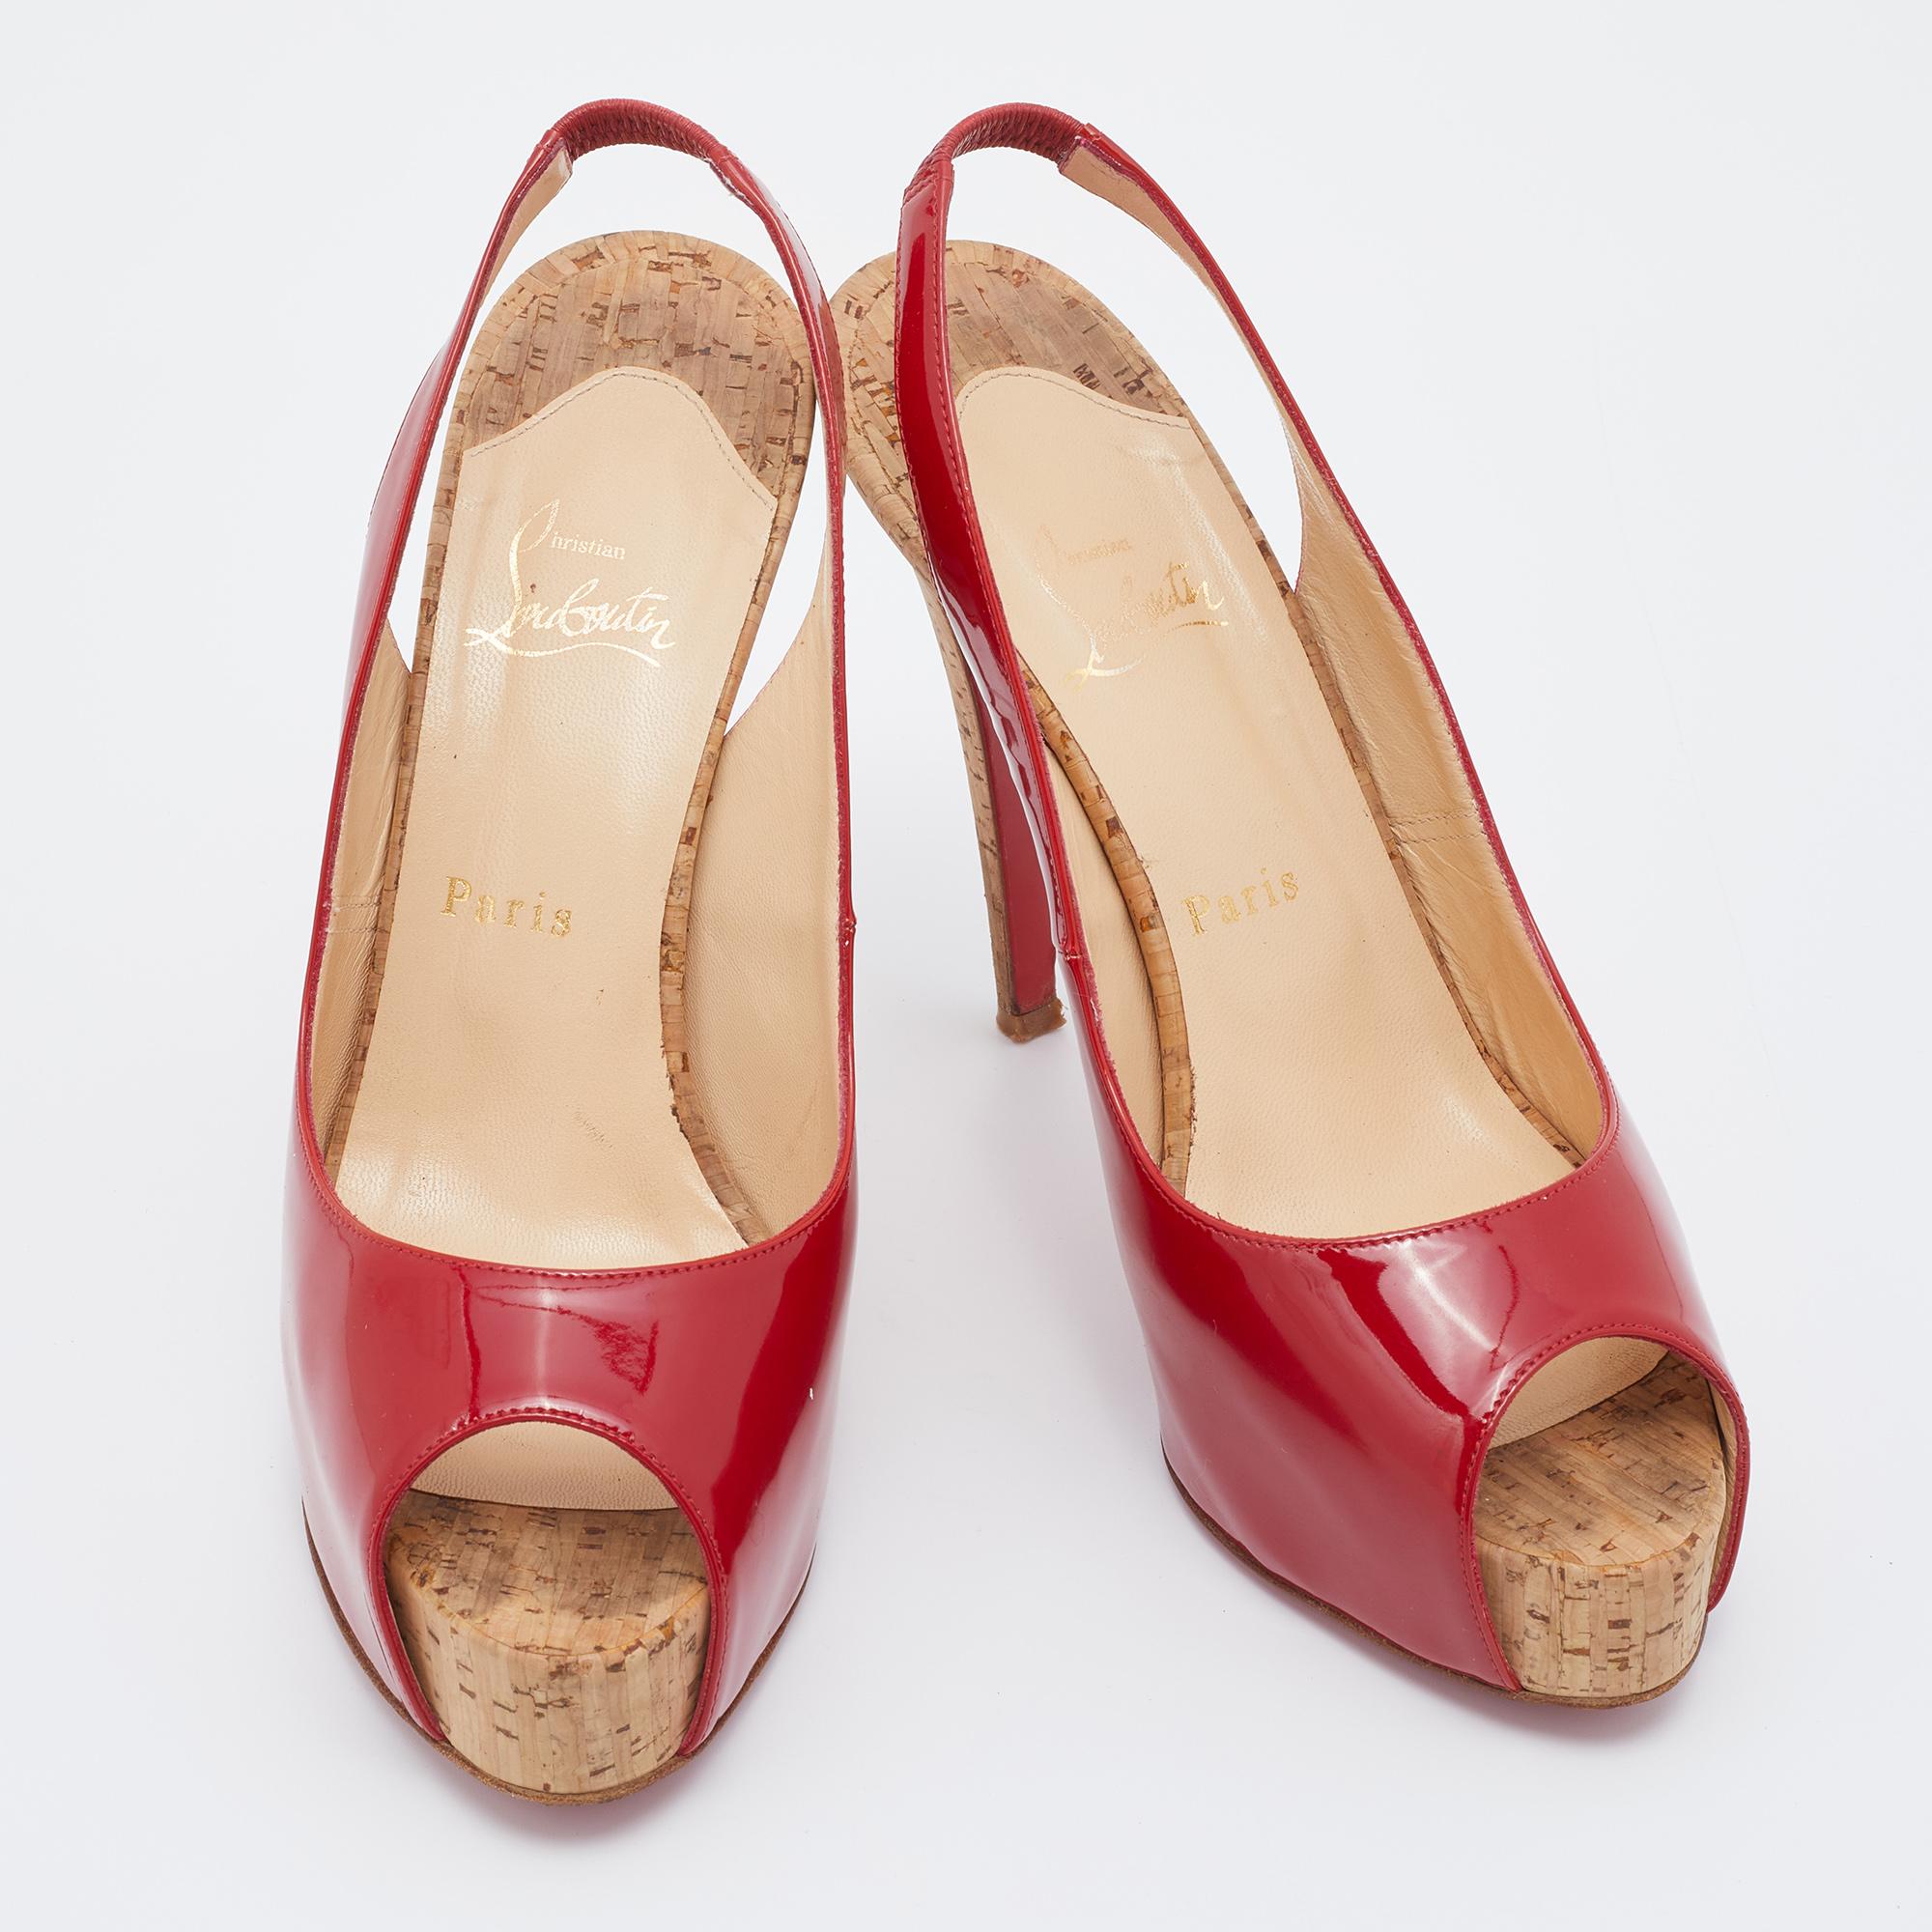 Make your feet feel special by flaunting these lovely Christian Louboutin sandals. The red patent leather exterior and towering heels lend a glamorous appeal to the slingback sandals. Leather soles provide a sturdy finish to this perfect party